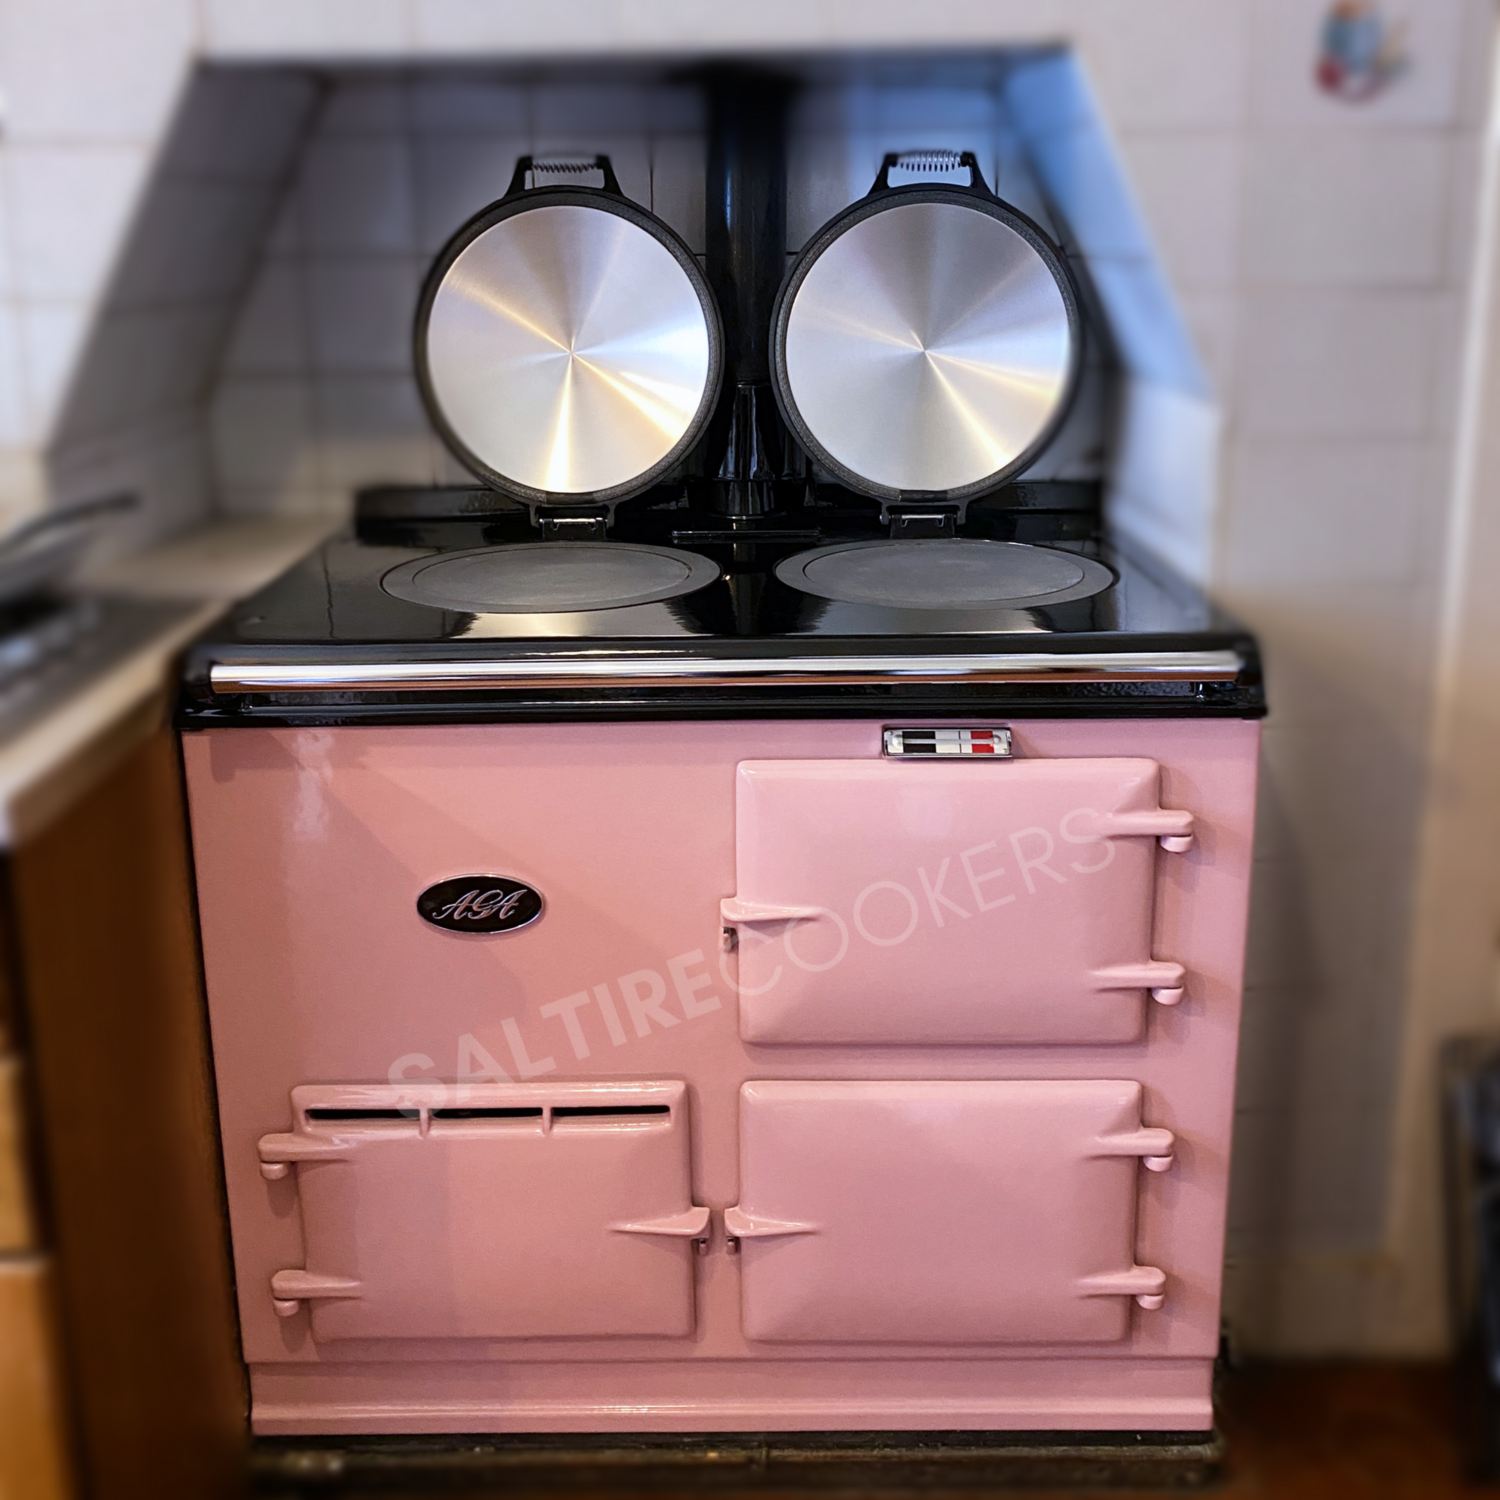 Reconditioned 2 Oven Gas Aga Cooker (Pink)